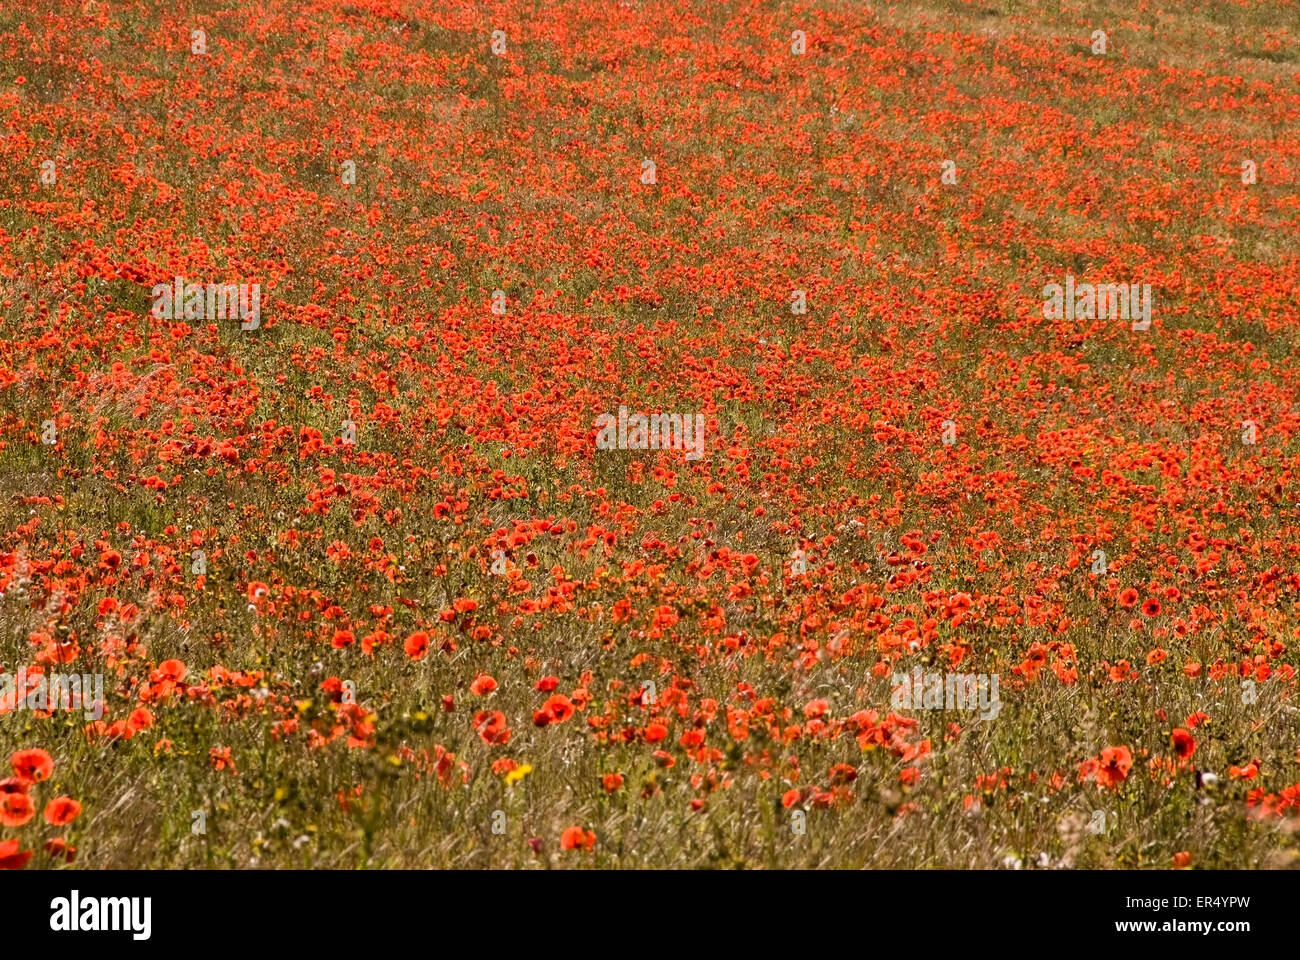 Bucks - Chiltern Hills - extensive field of scarlet  poppies - mass of colour - eye catching image Stock Photo